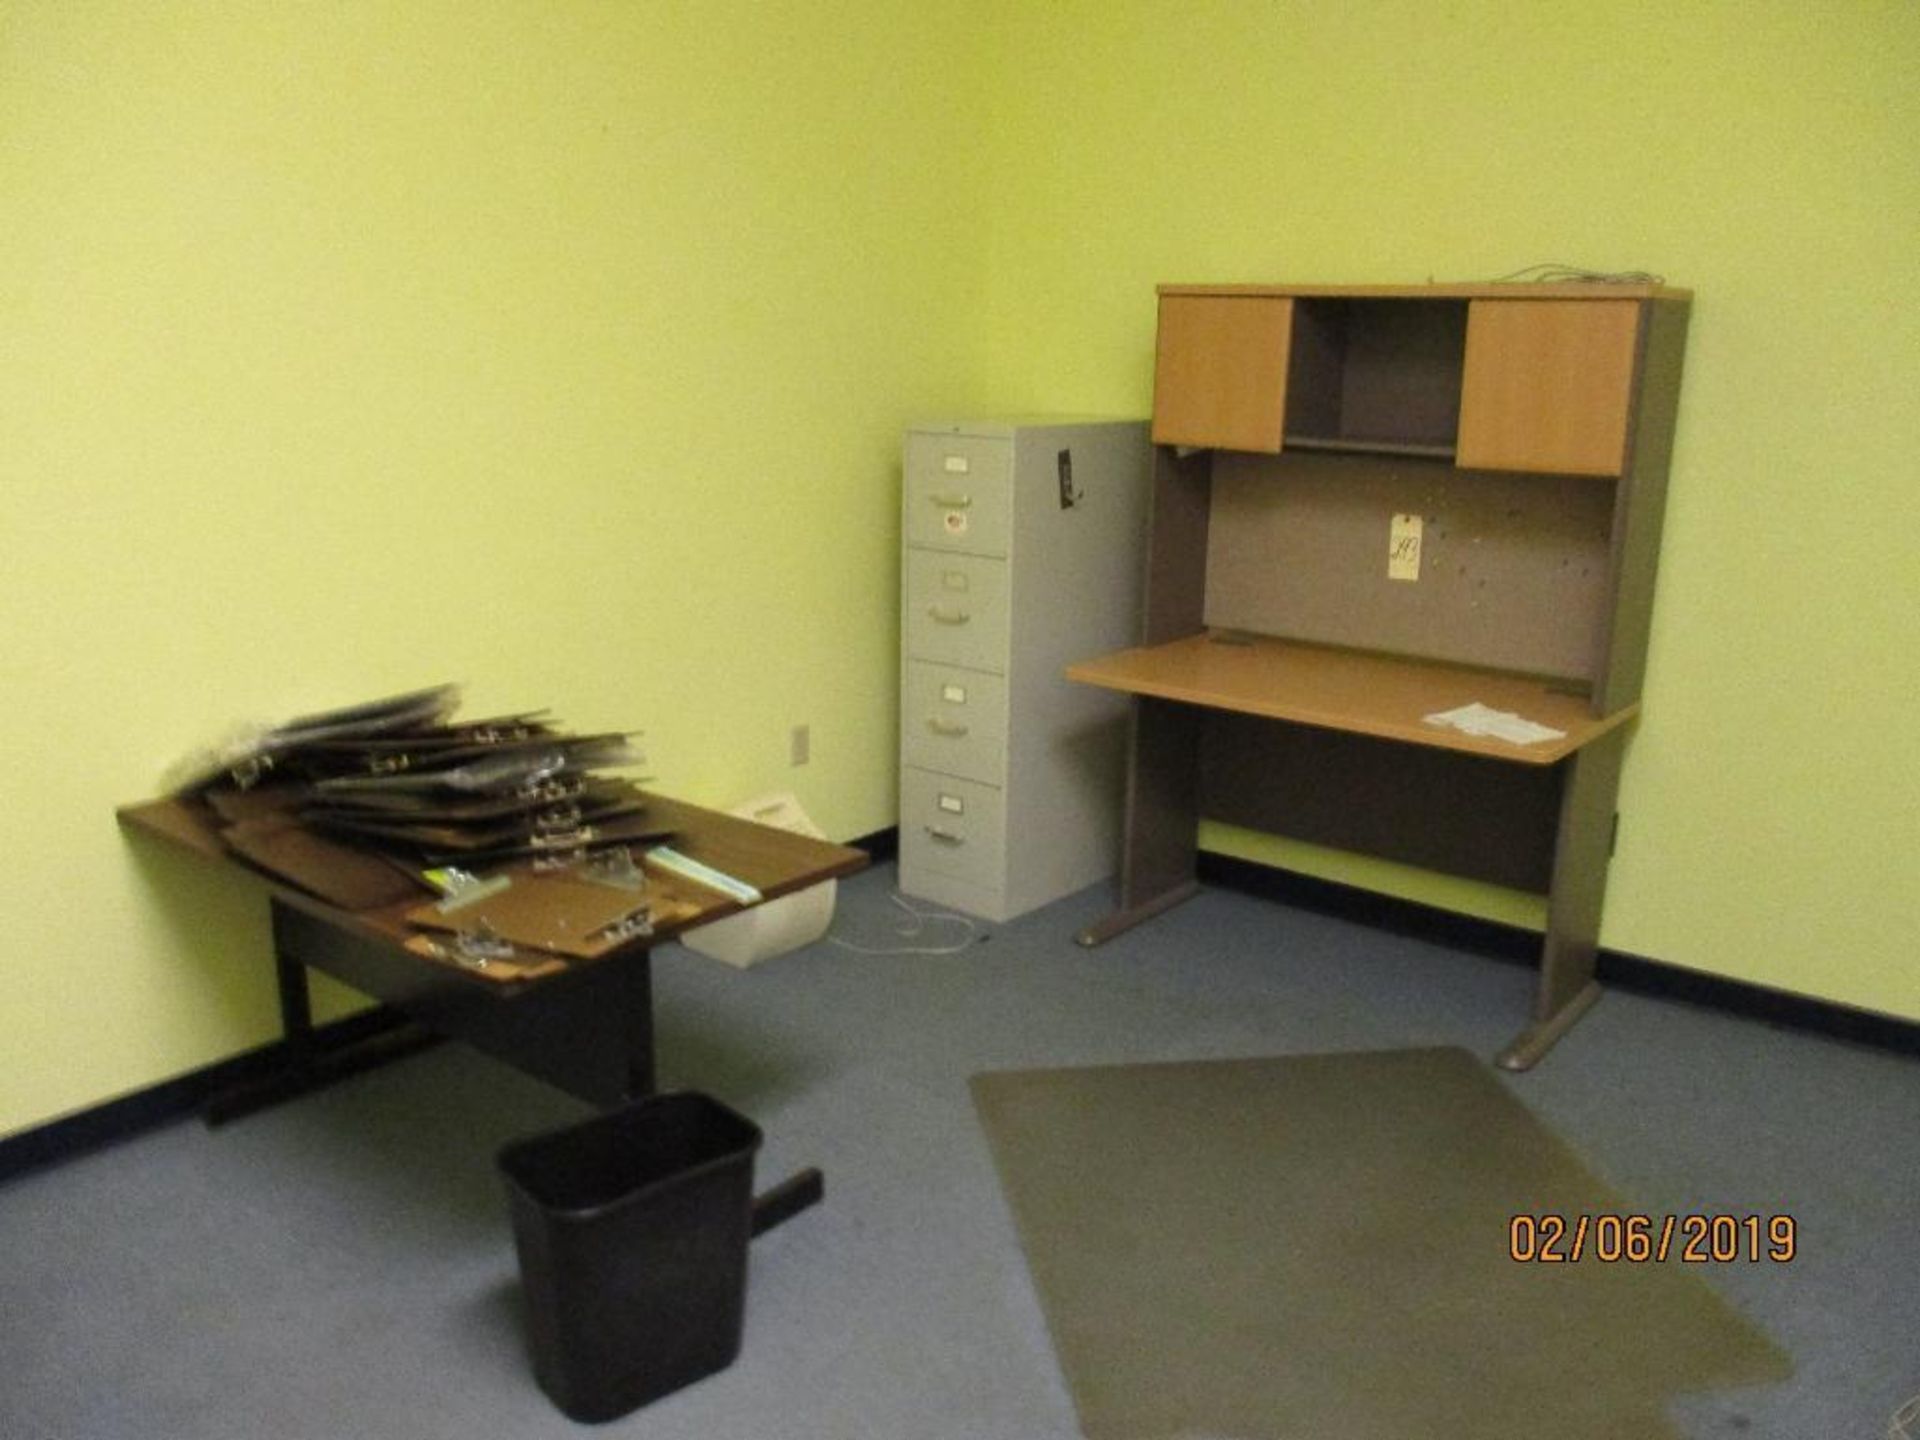 Two Tables, One File Cabinet, One Shelf No Contents